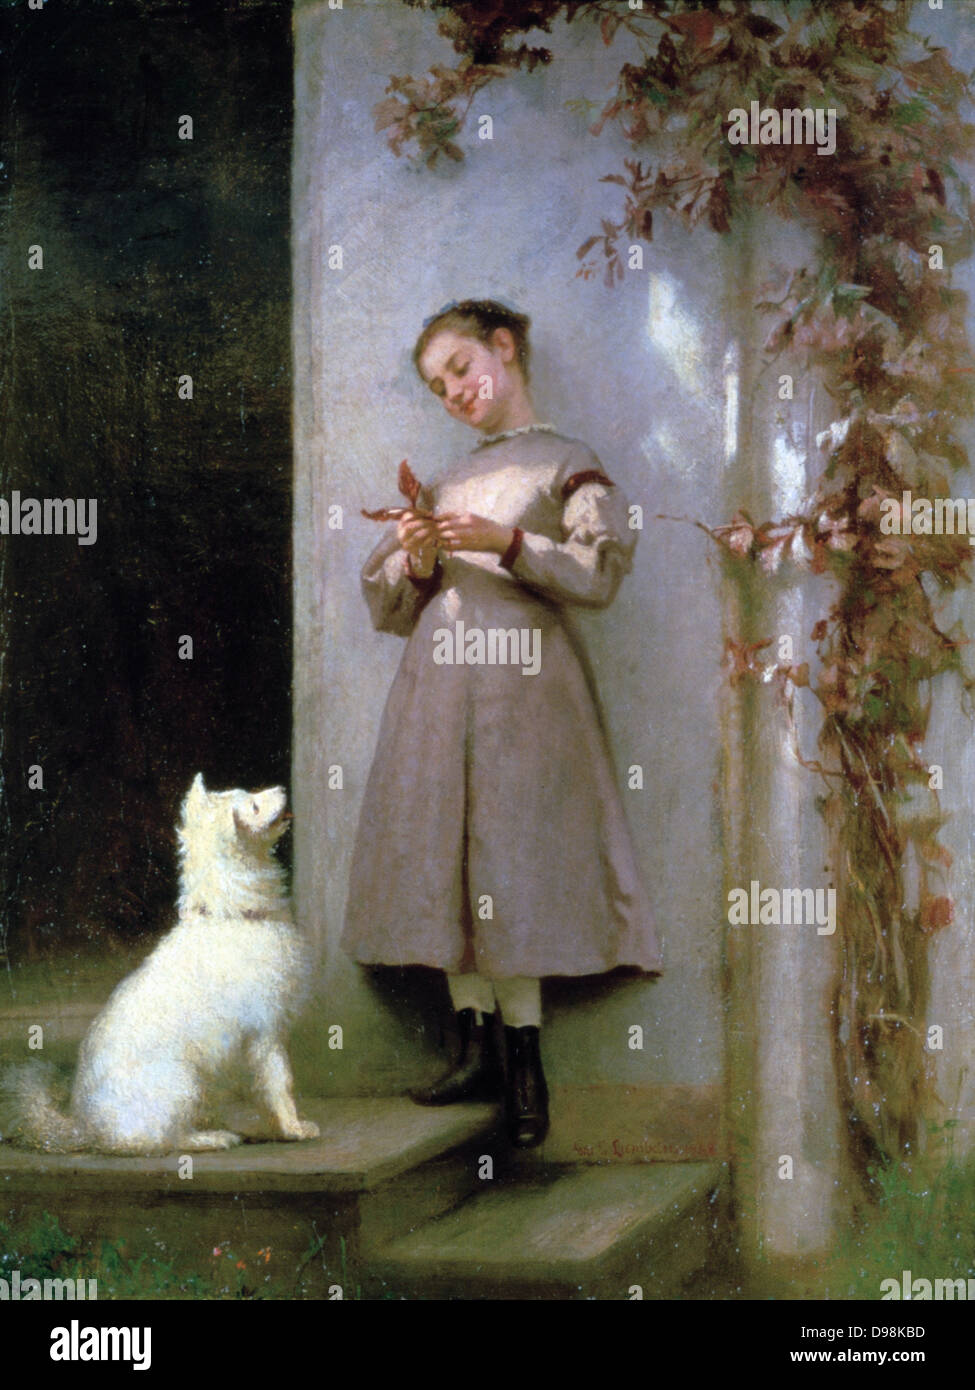 Playmates', 1868. Oil on canvas. George Cochran Lambdin (1830-1896) American painter. Smiling young girl in calf-length dress and ankle-boots standing on steps. Her pet white dog looks up at her in expectation. Youth Childhood Innocence. Stock Photo